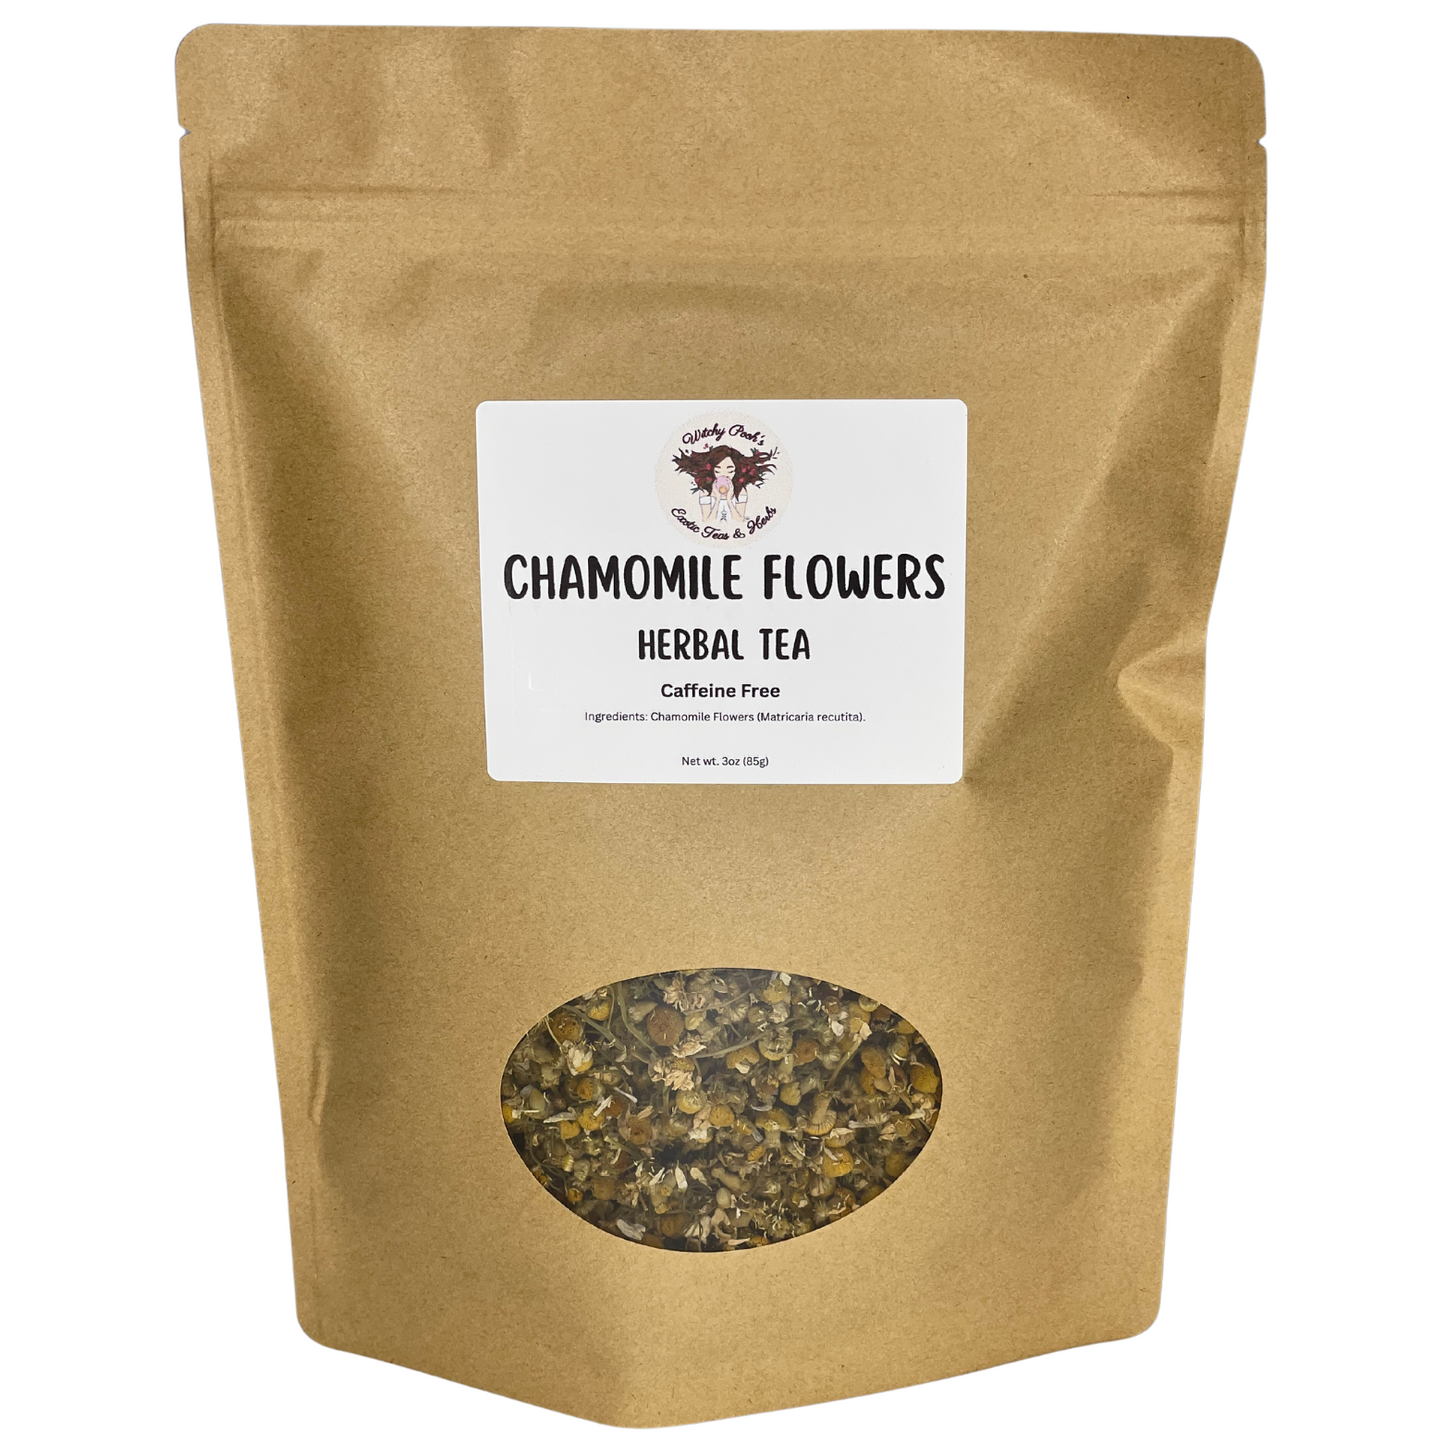 Witchy Pooh's Chamomile Flowers Loose Leaf Herbal Tea, Caffeine Free, For Stress Relief and Sleep Aid-6